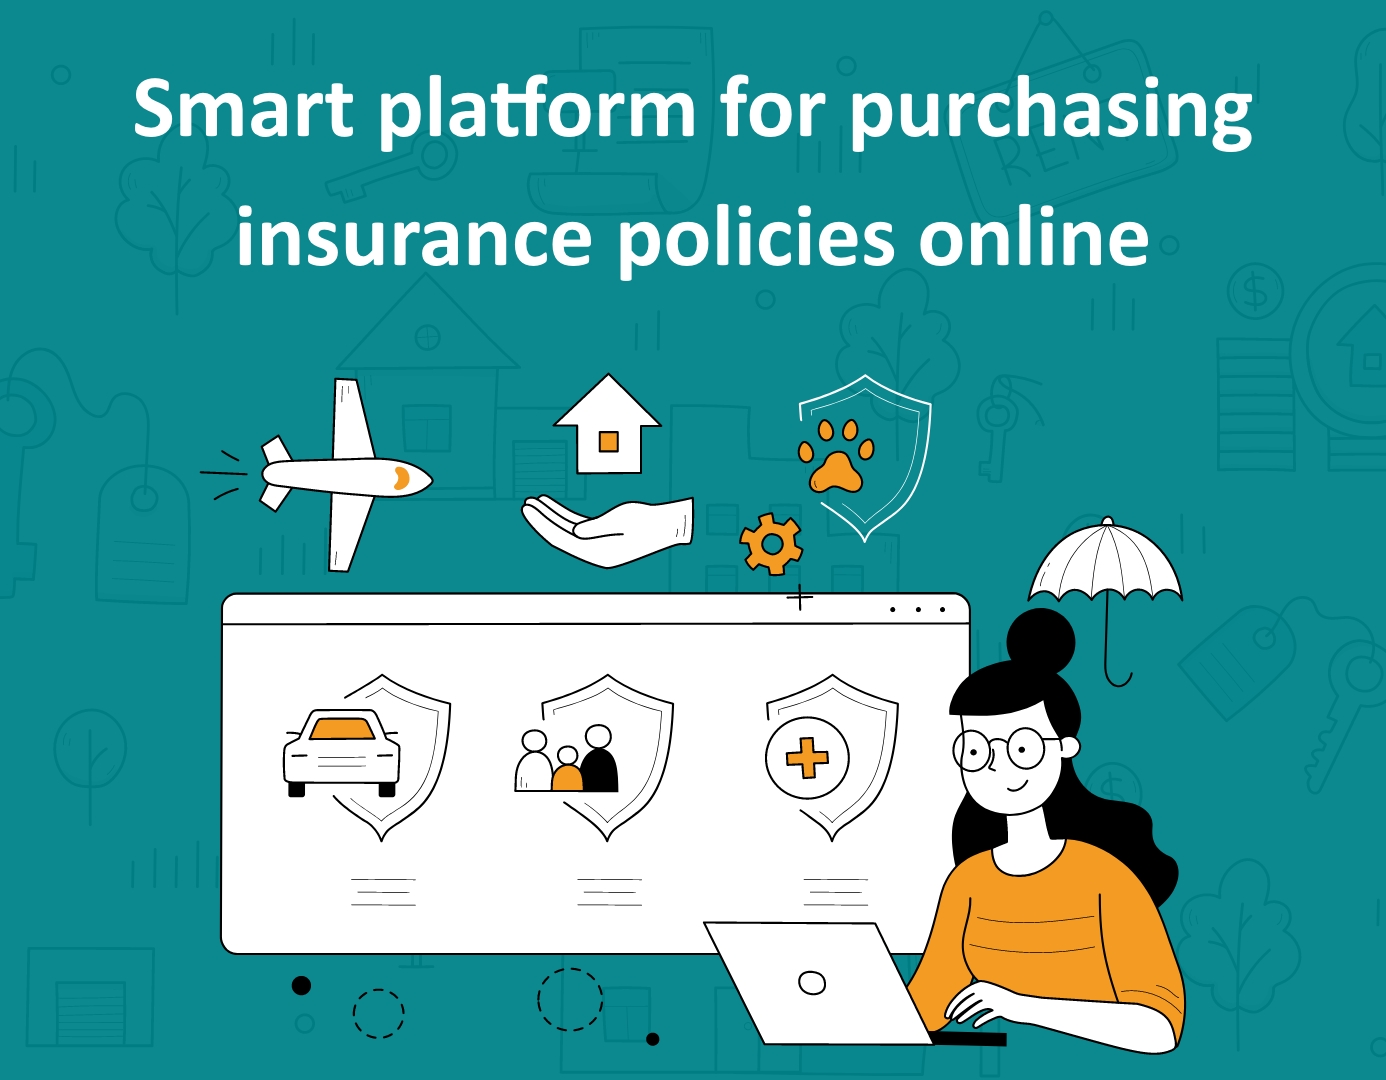 Illustration of smart online insurance purchasing platform, highlighting convenience and efficiency of buying policies digitally